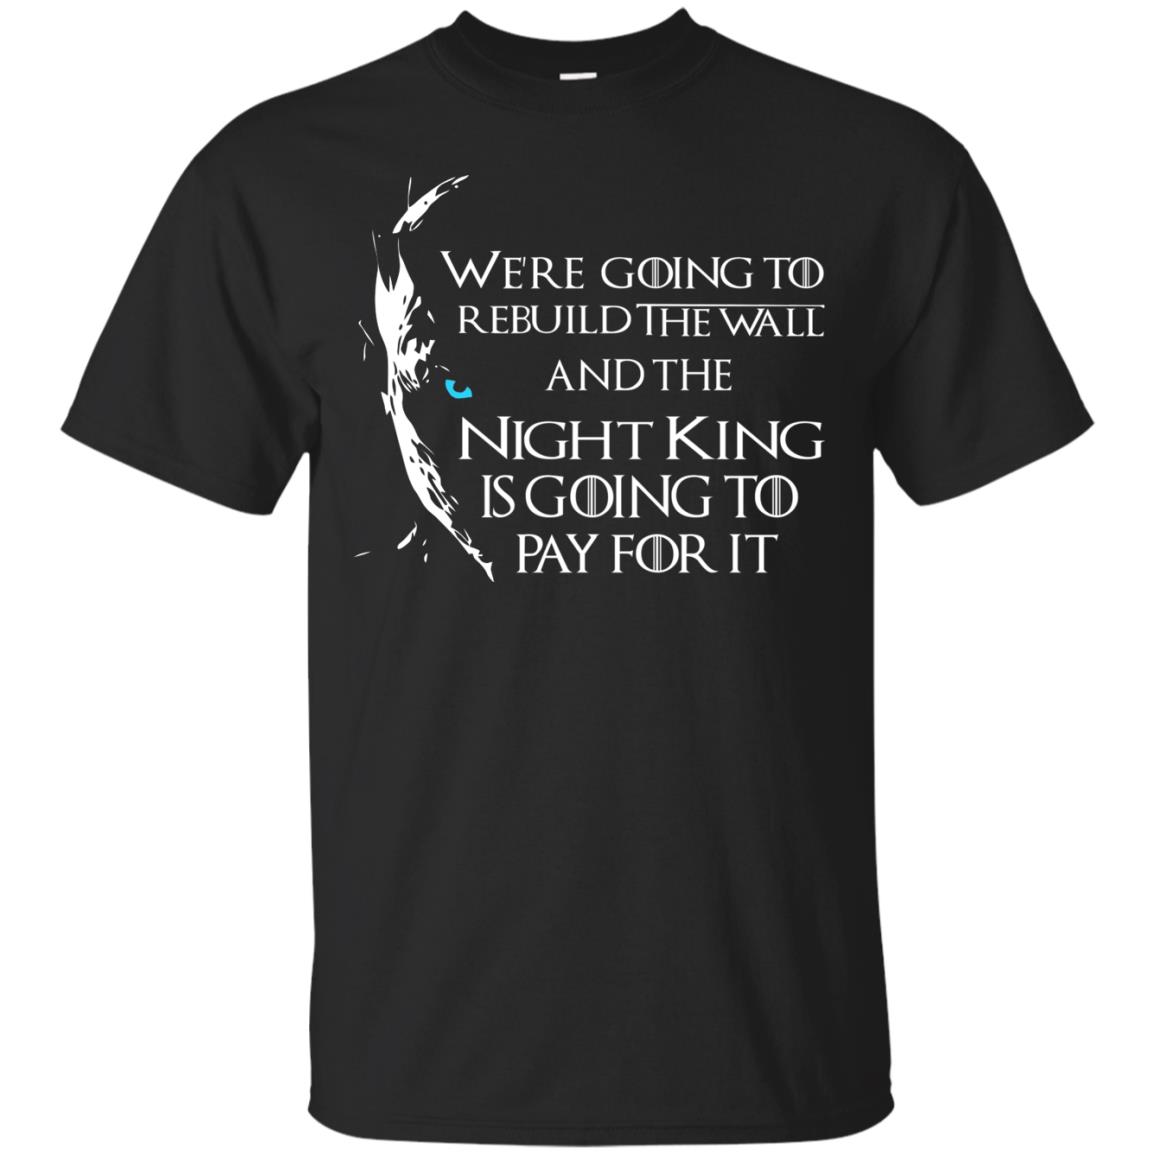 Game of Thrones: We are going to rebuild the wall t-shirt, hoodies, tank